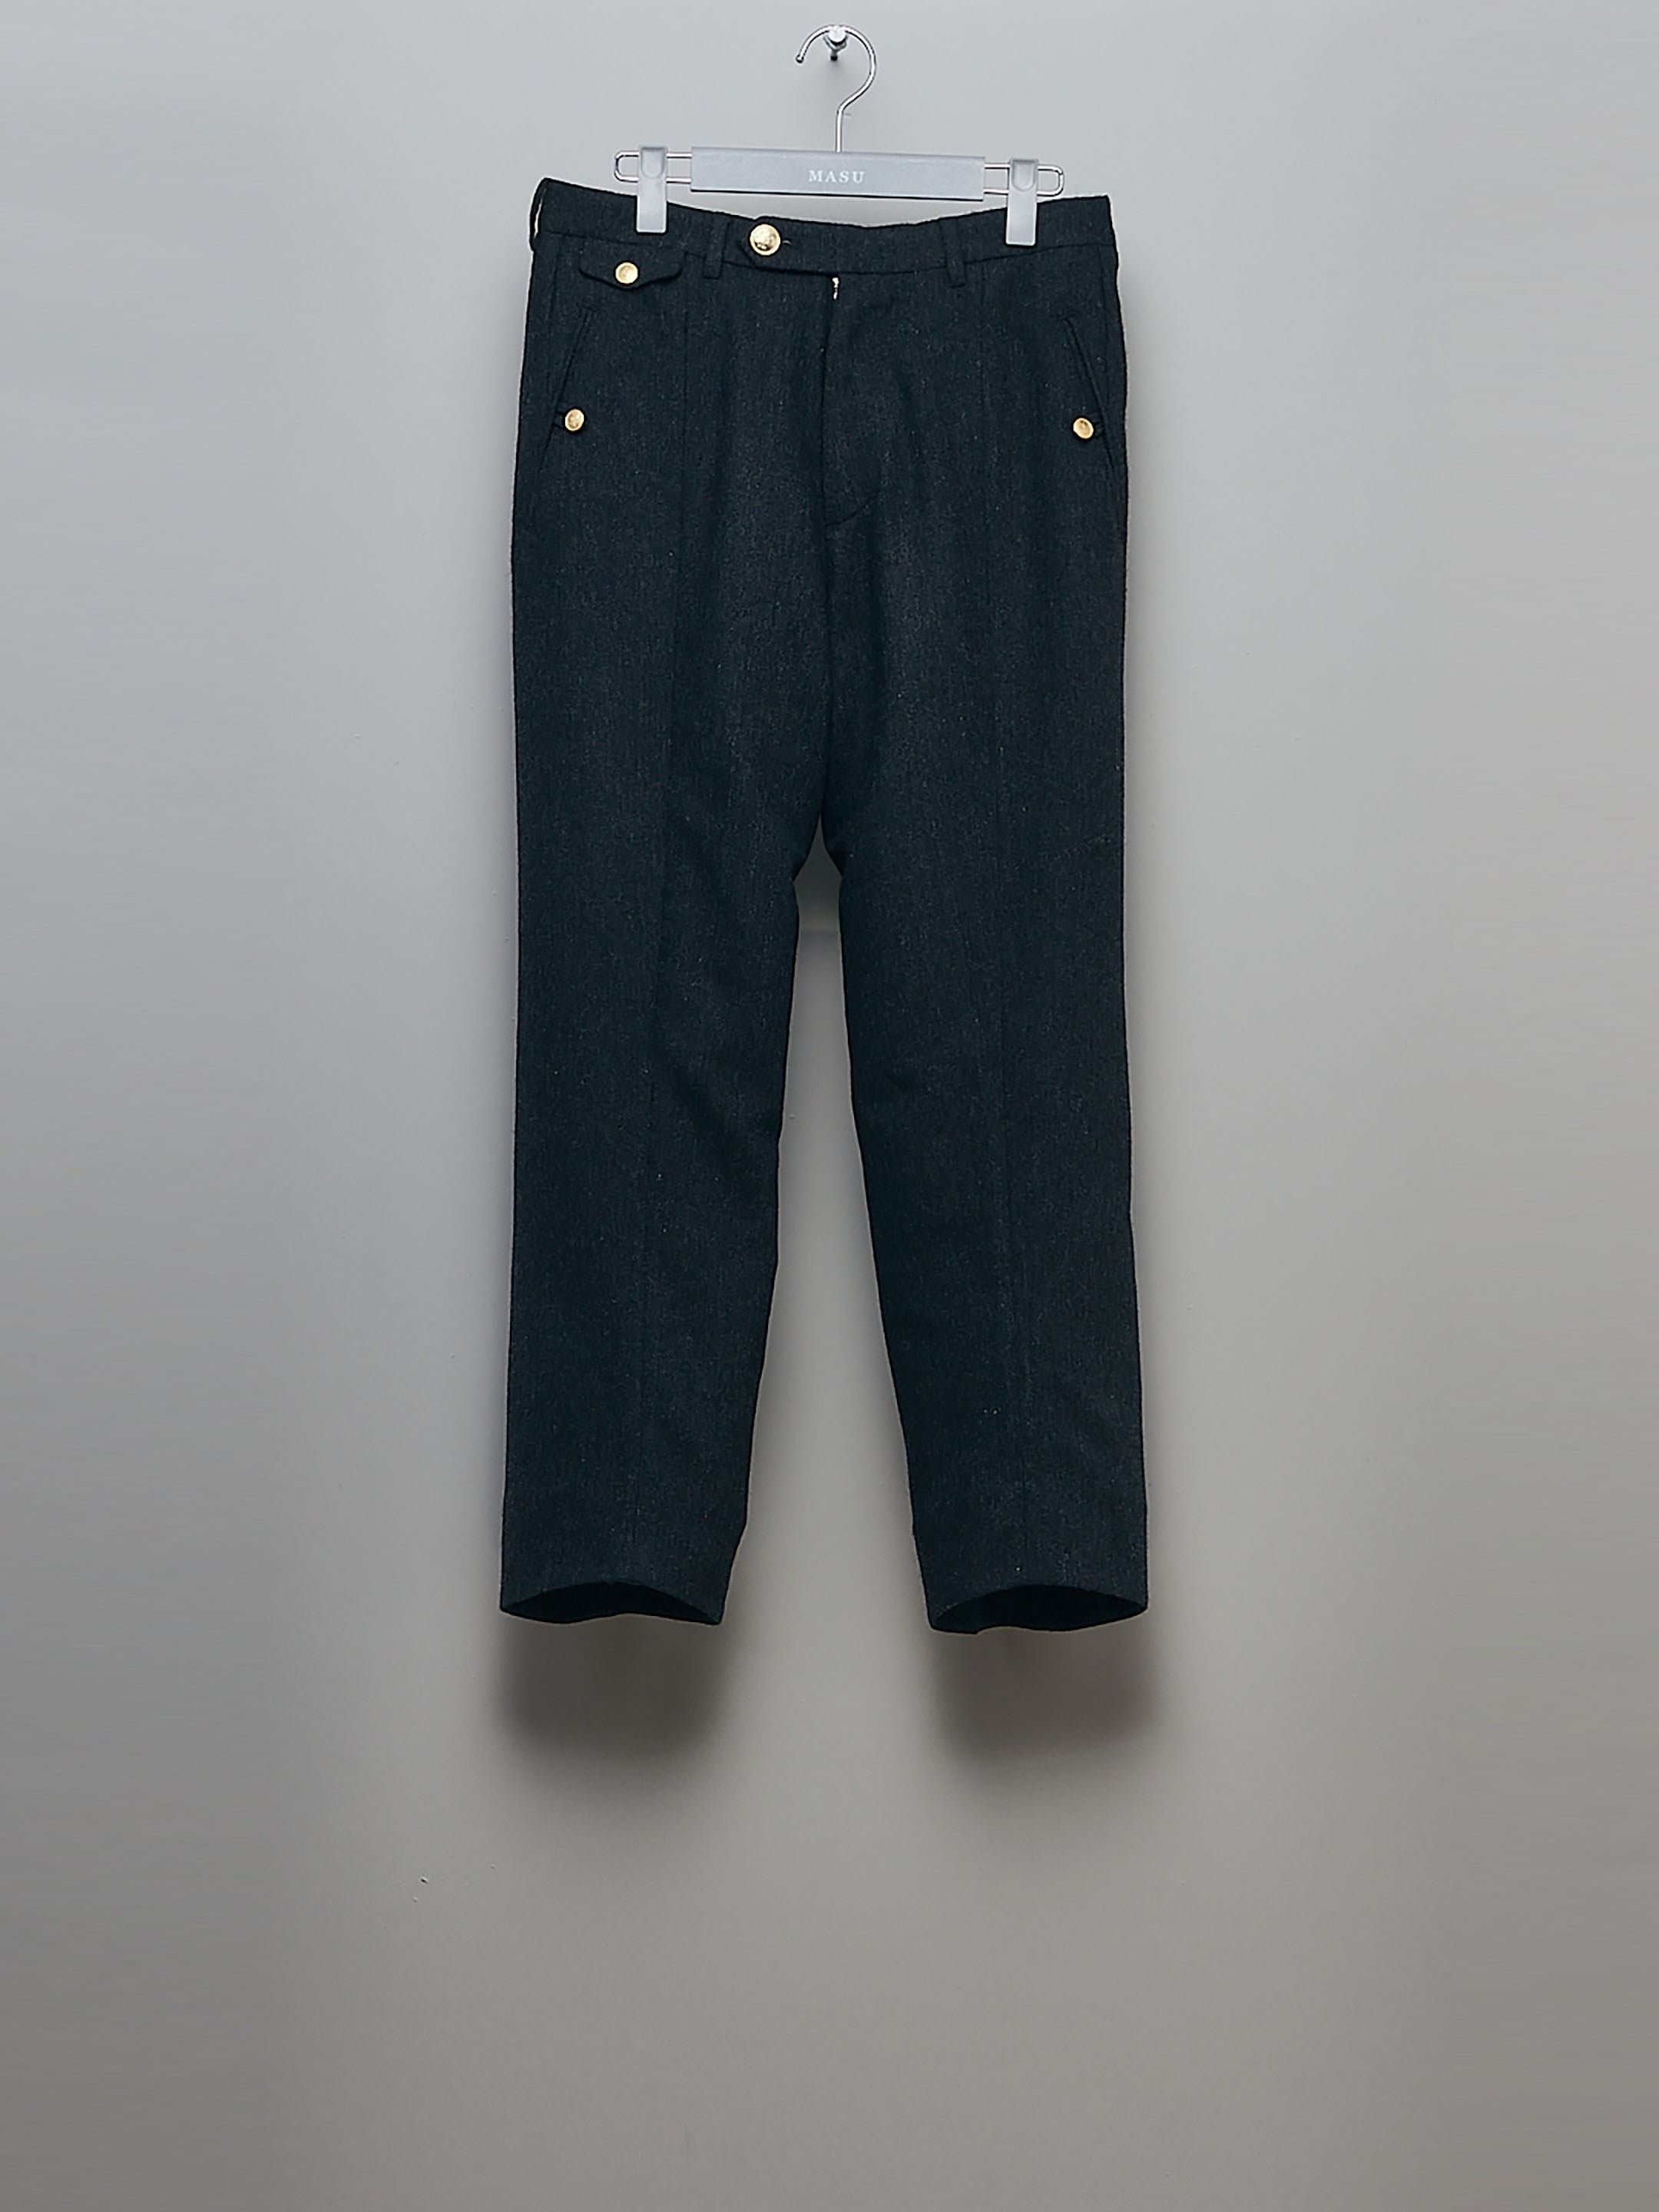 MASU 22AW SILENT OFFICER TROUSERS - その他